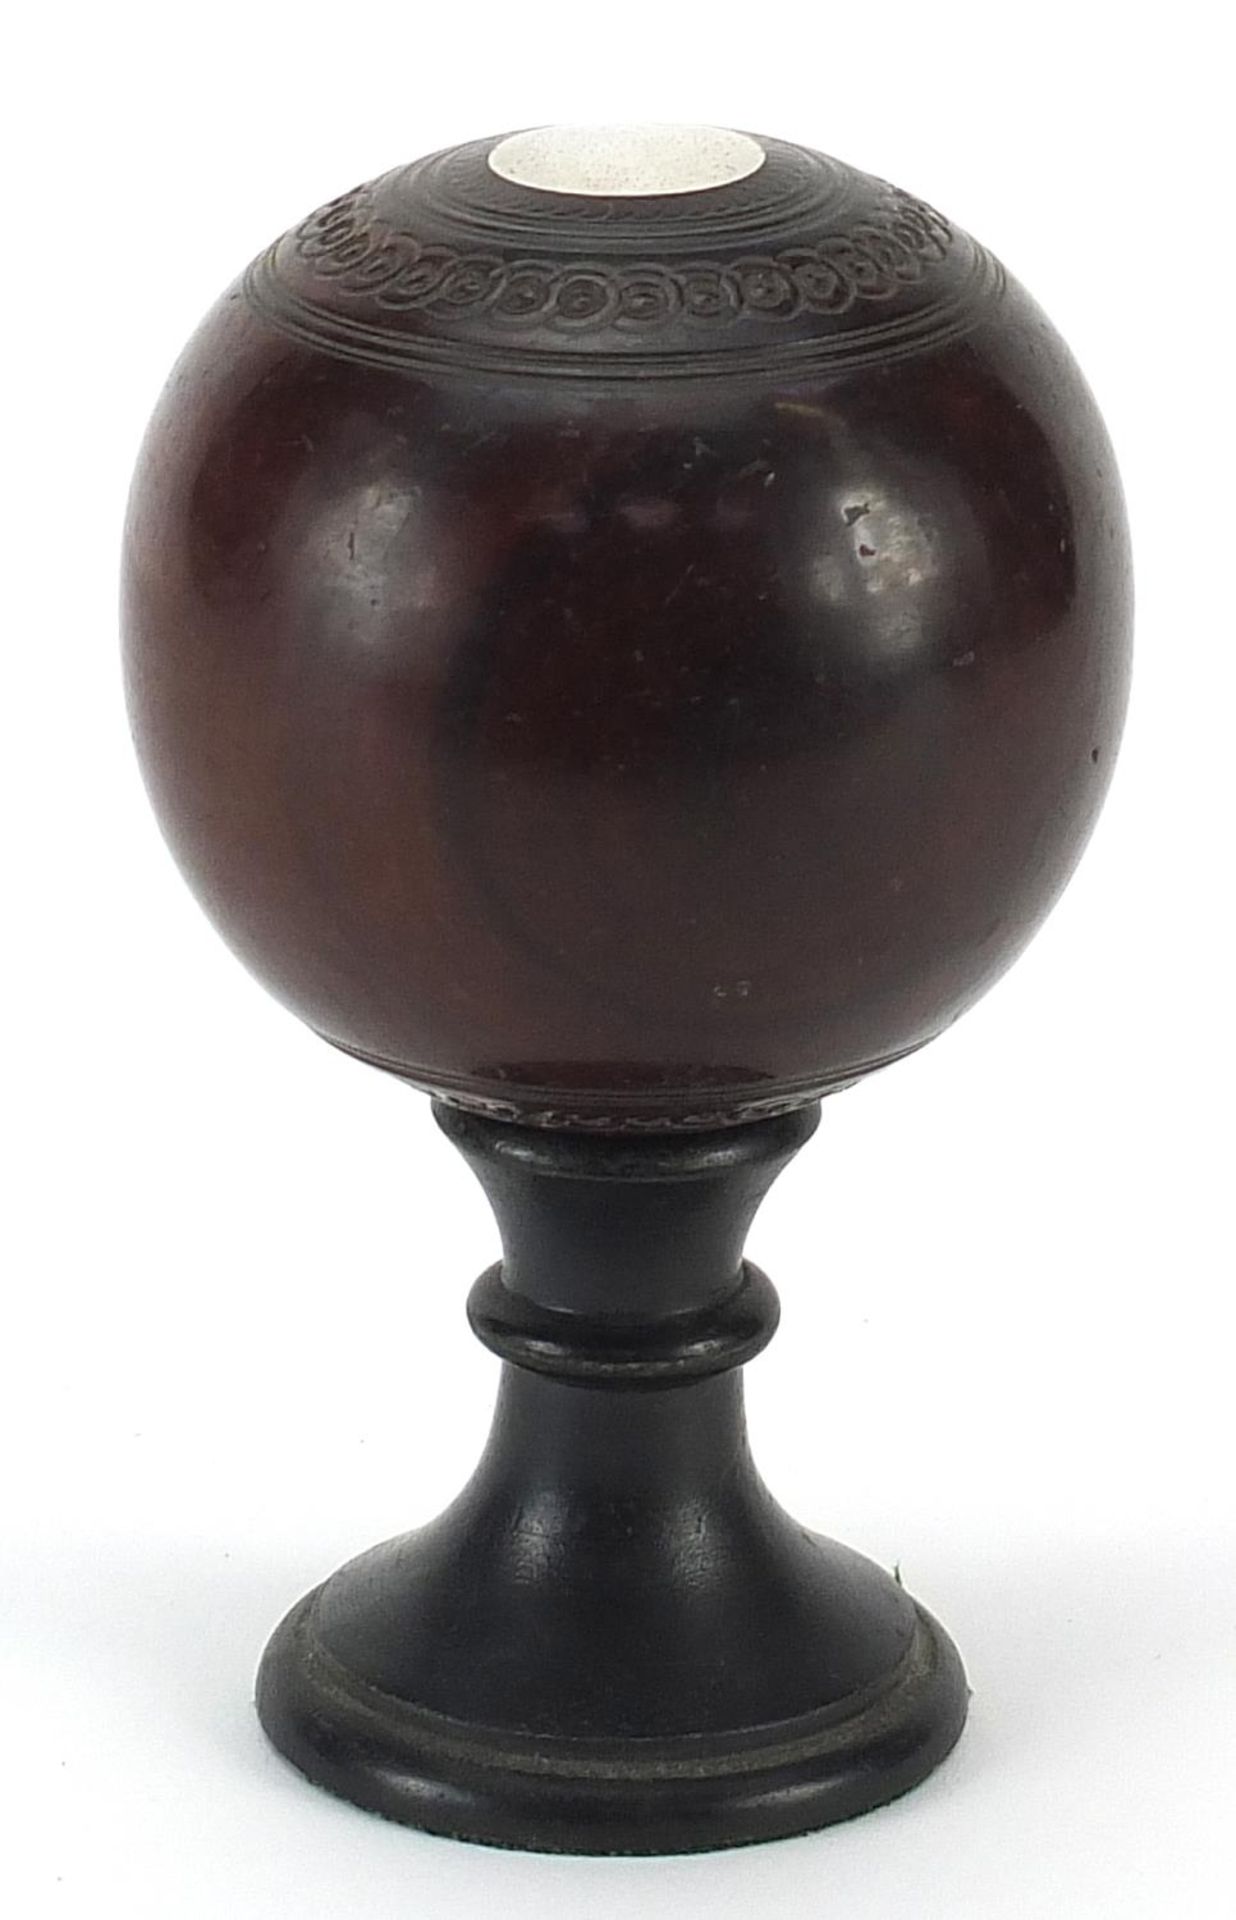 Presentation rosewood bowl by Jaques of London with inset silver plaques on ebonised stand, - Image 2 of 4